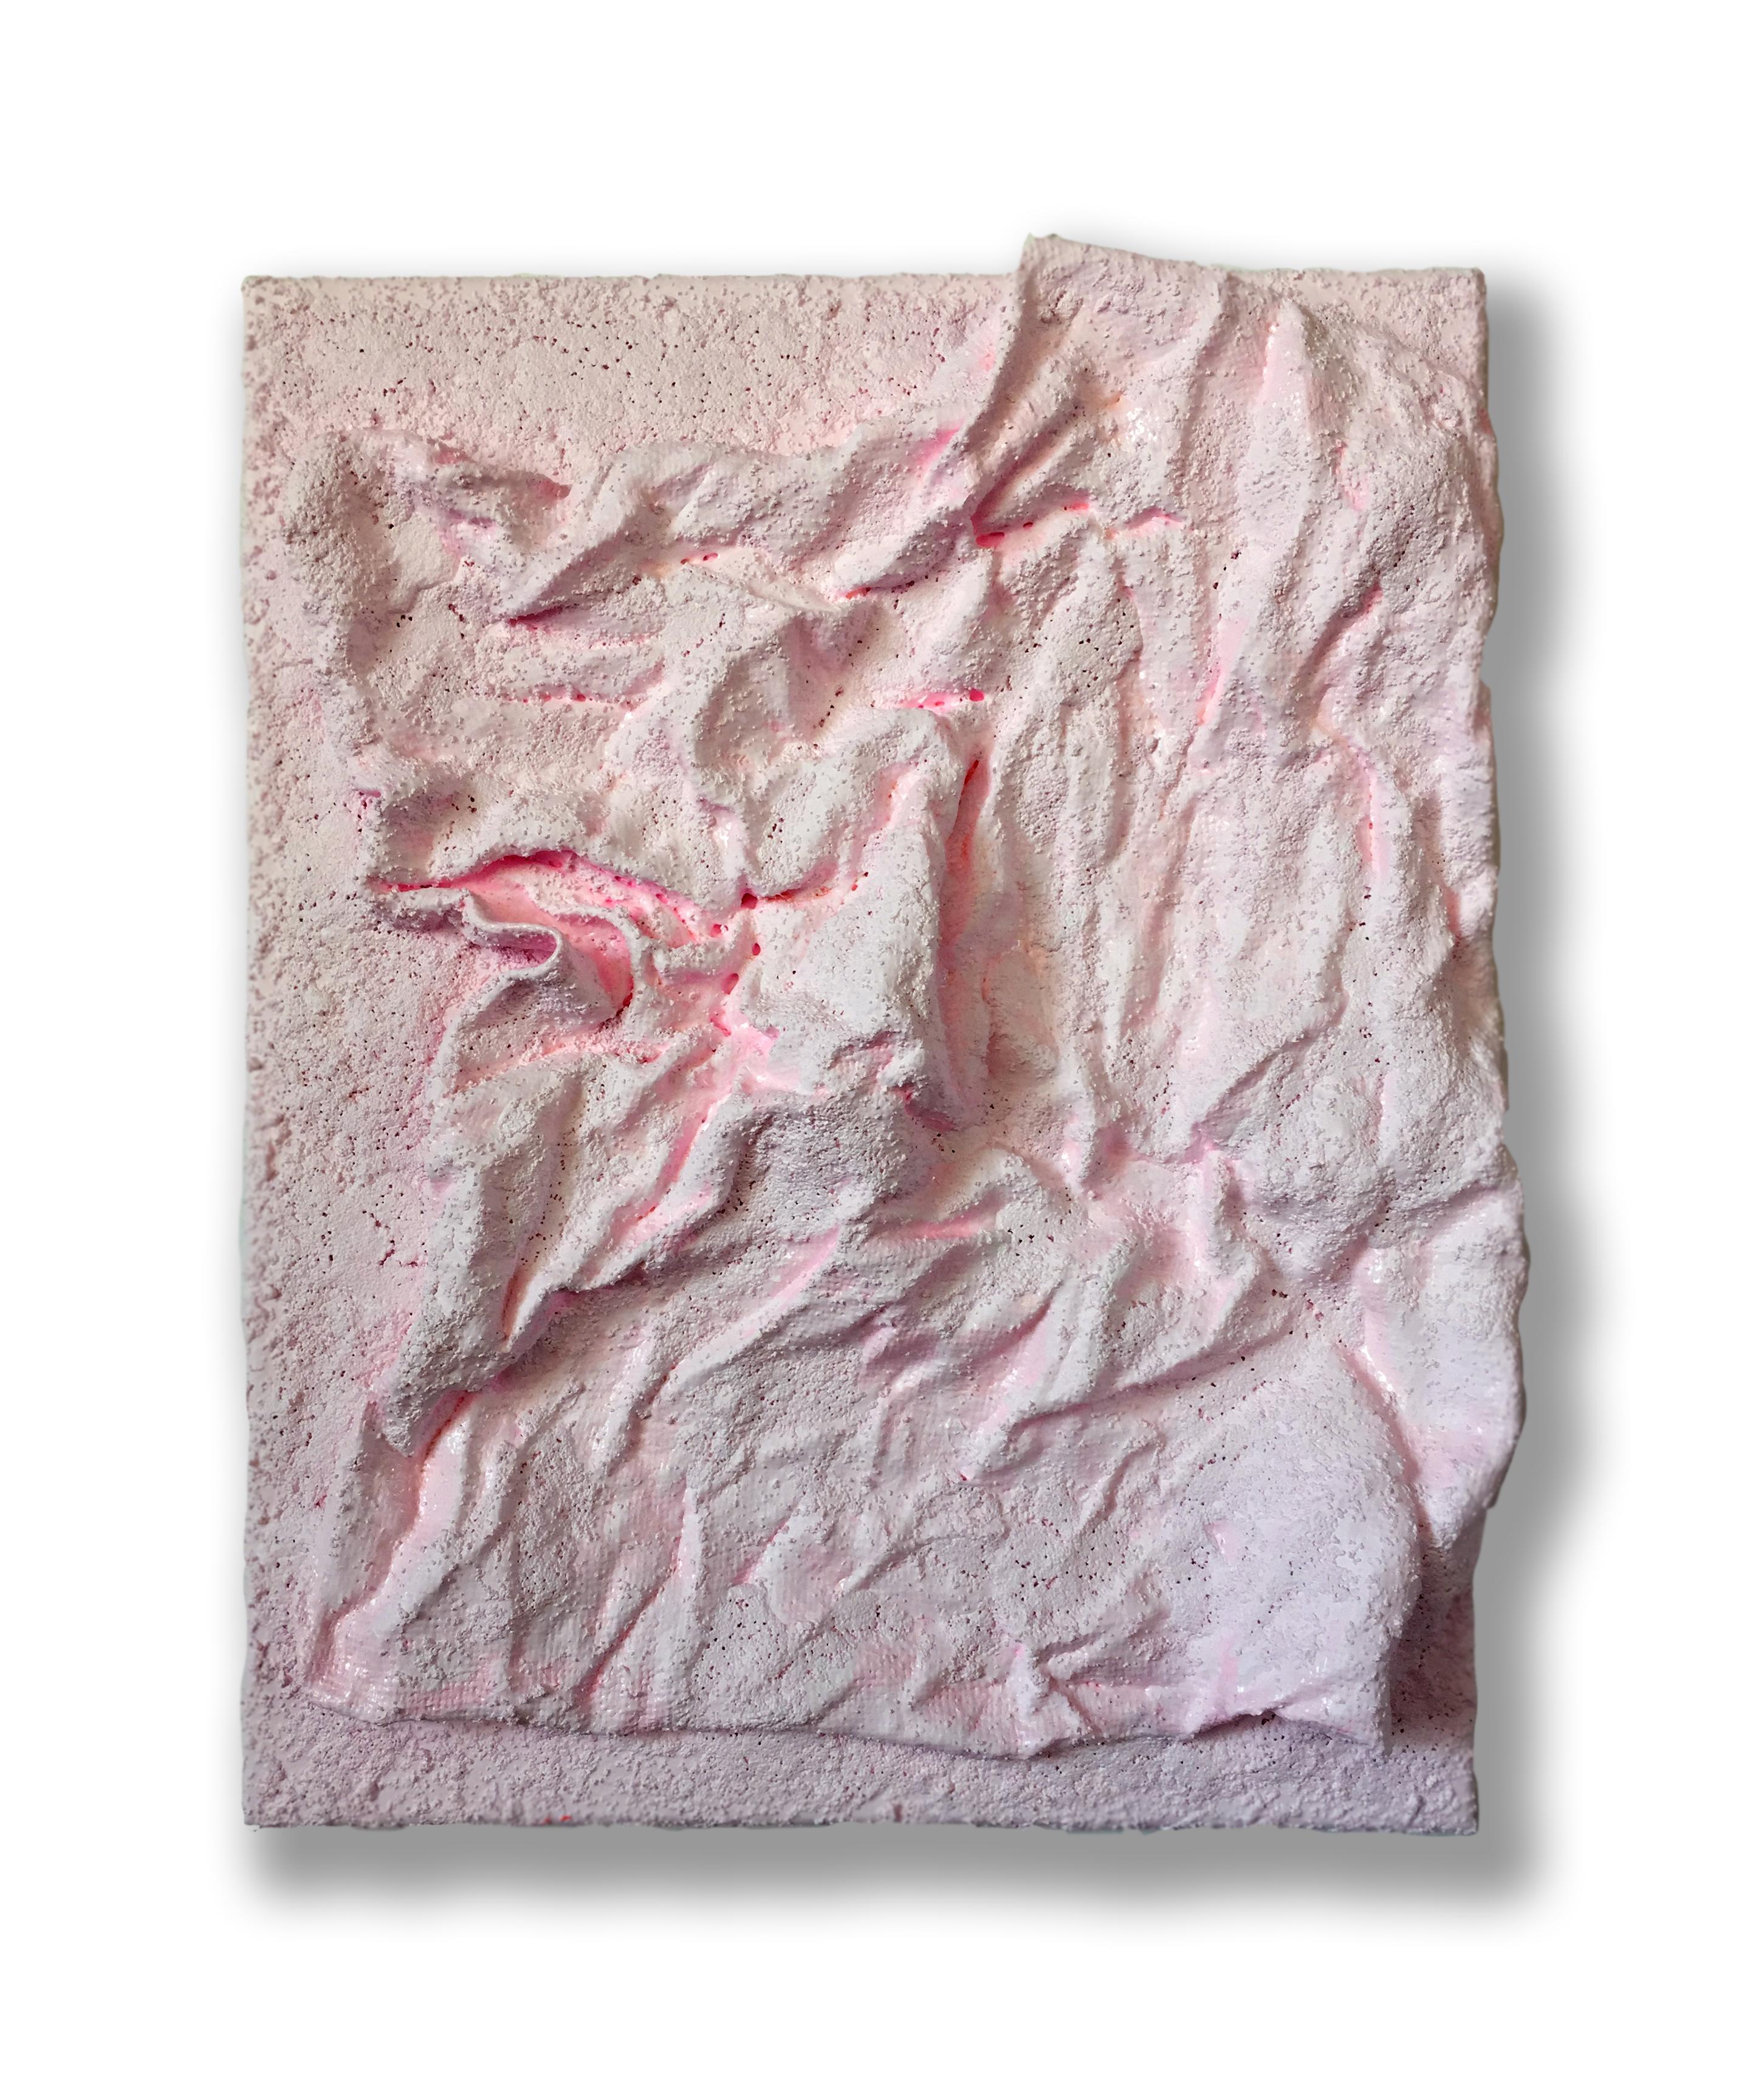 Baby Pink Folds (wall sculpture, texture painting, fabric collage, textured) - Mixed Media Art by Chloe Hedden